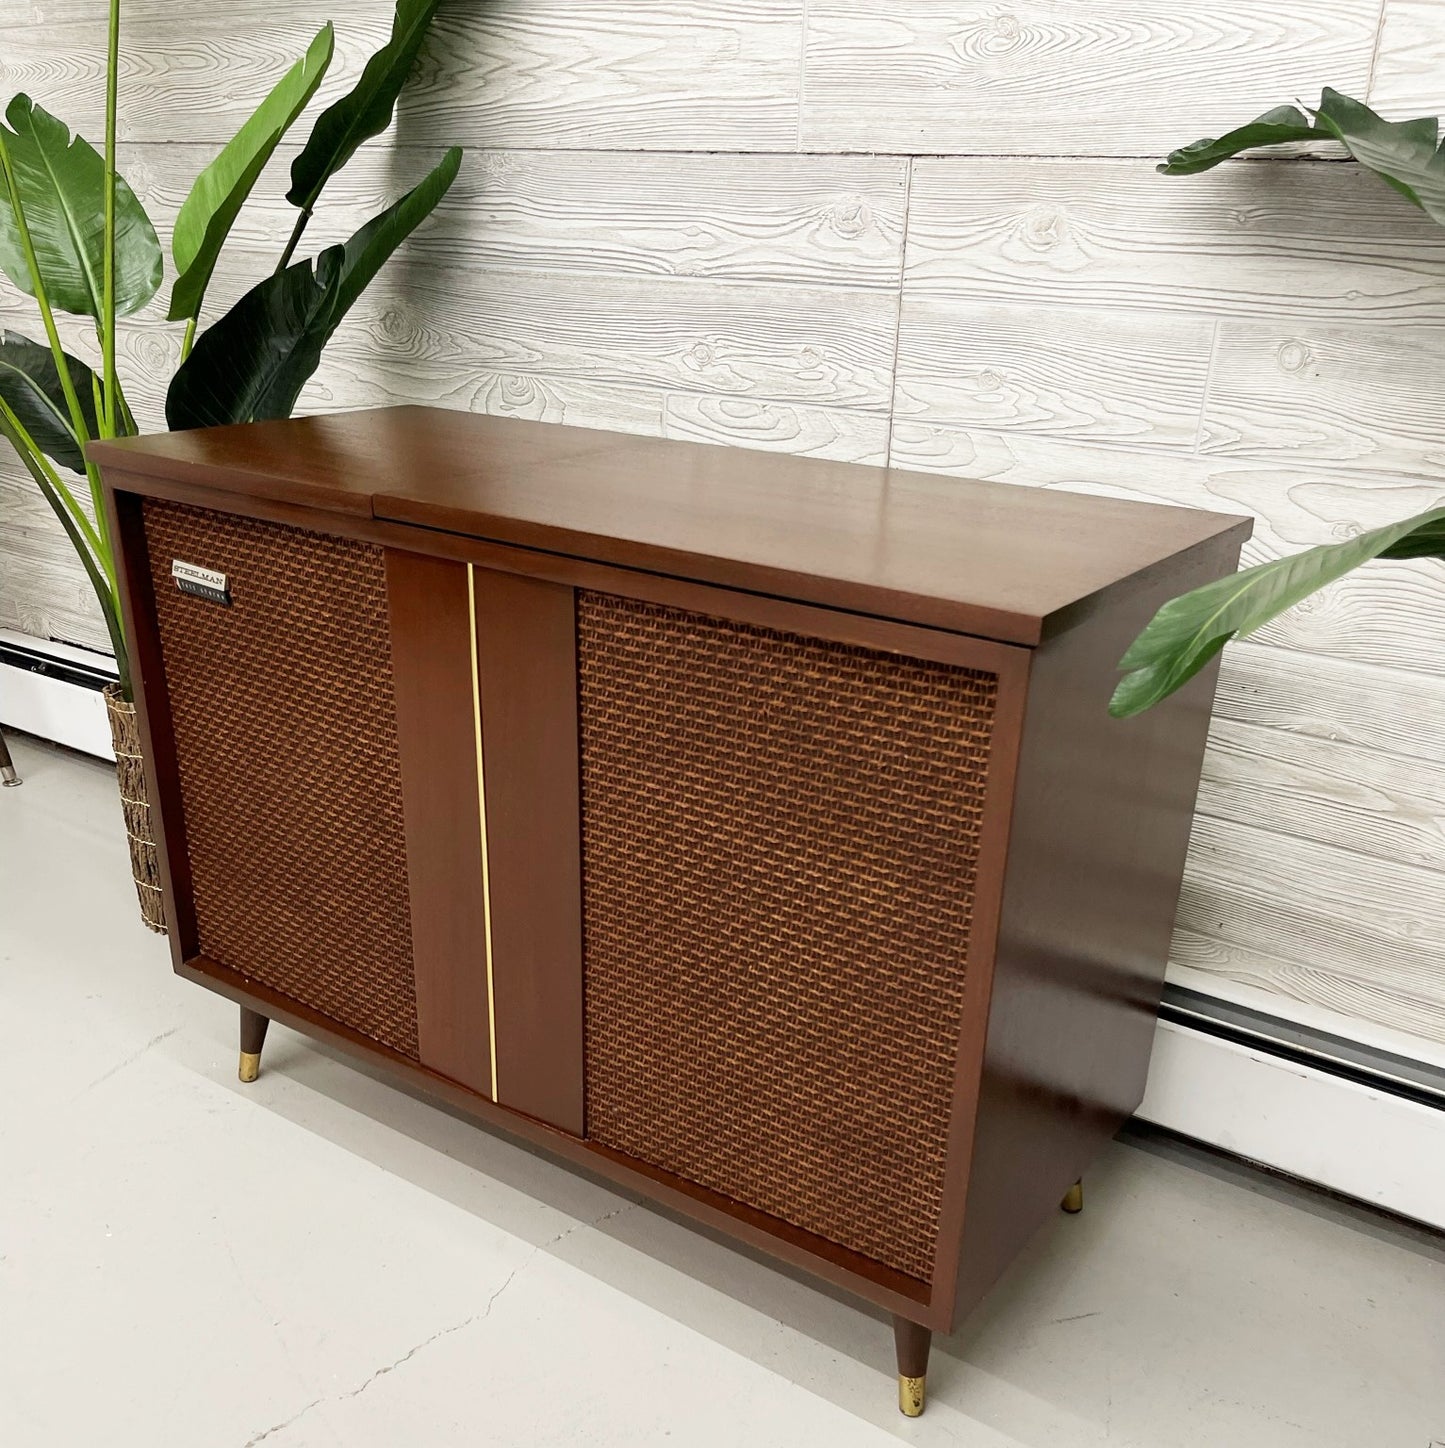 SOLD OUT!!! STEELMAN Mid Century Stereo Console Record Player Changer AM FM Bluetooth Alexa The Vintedge Co.